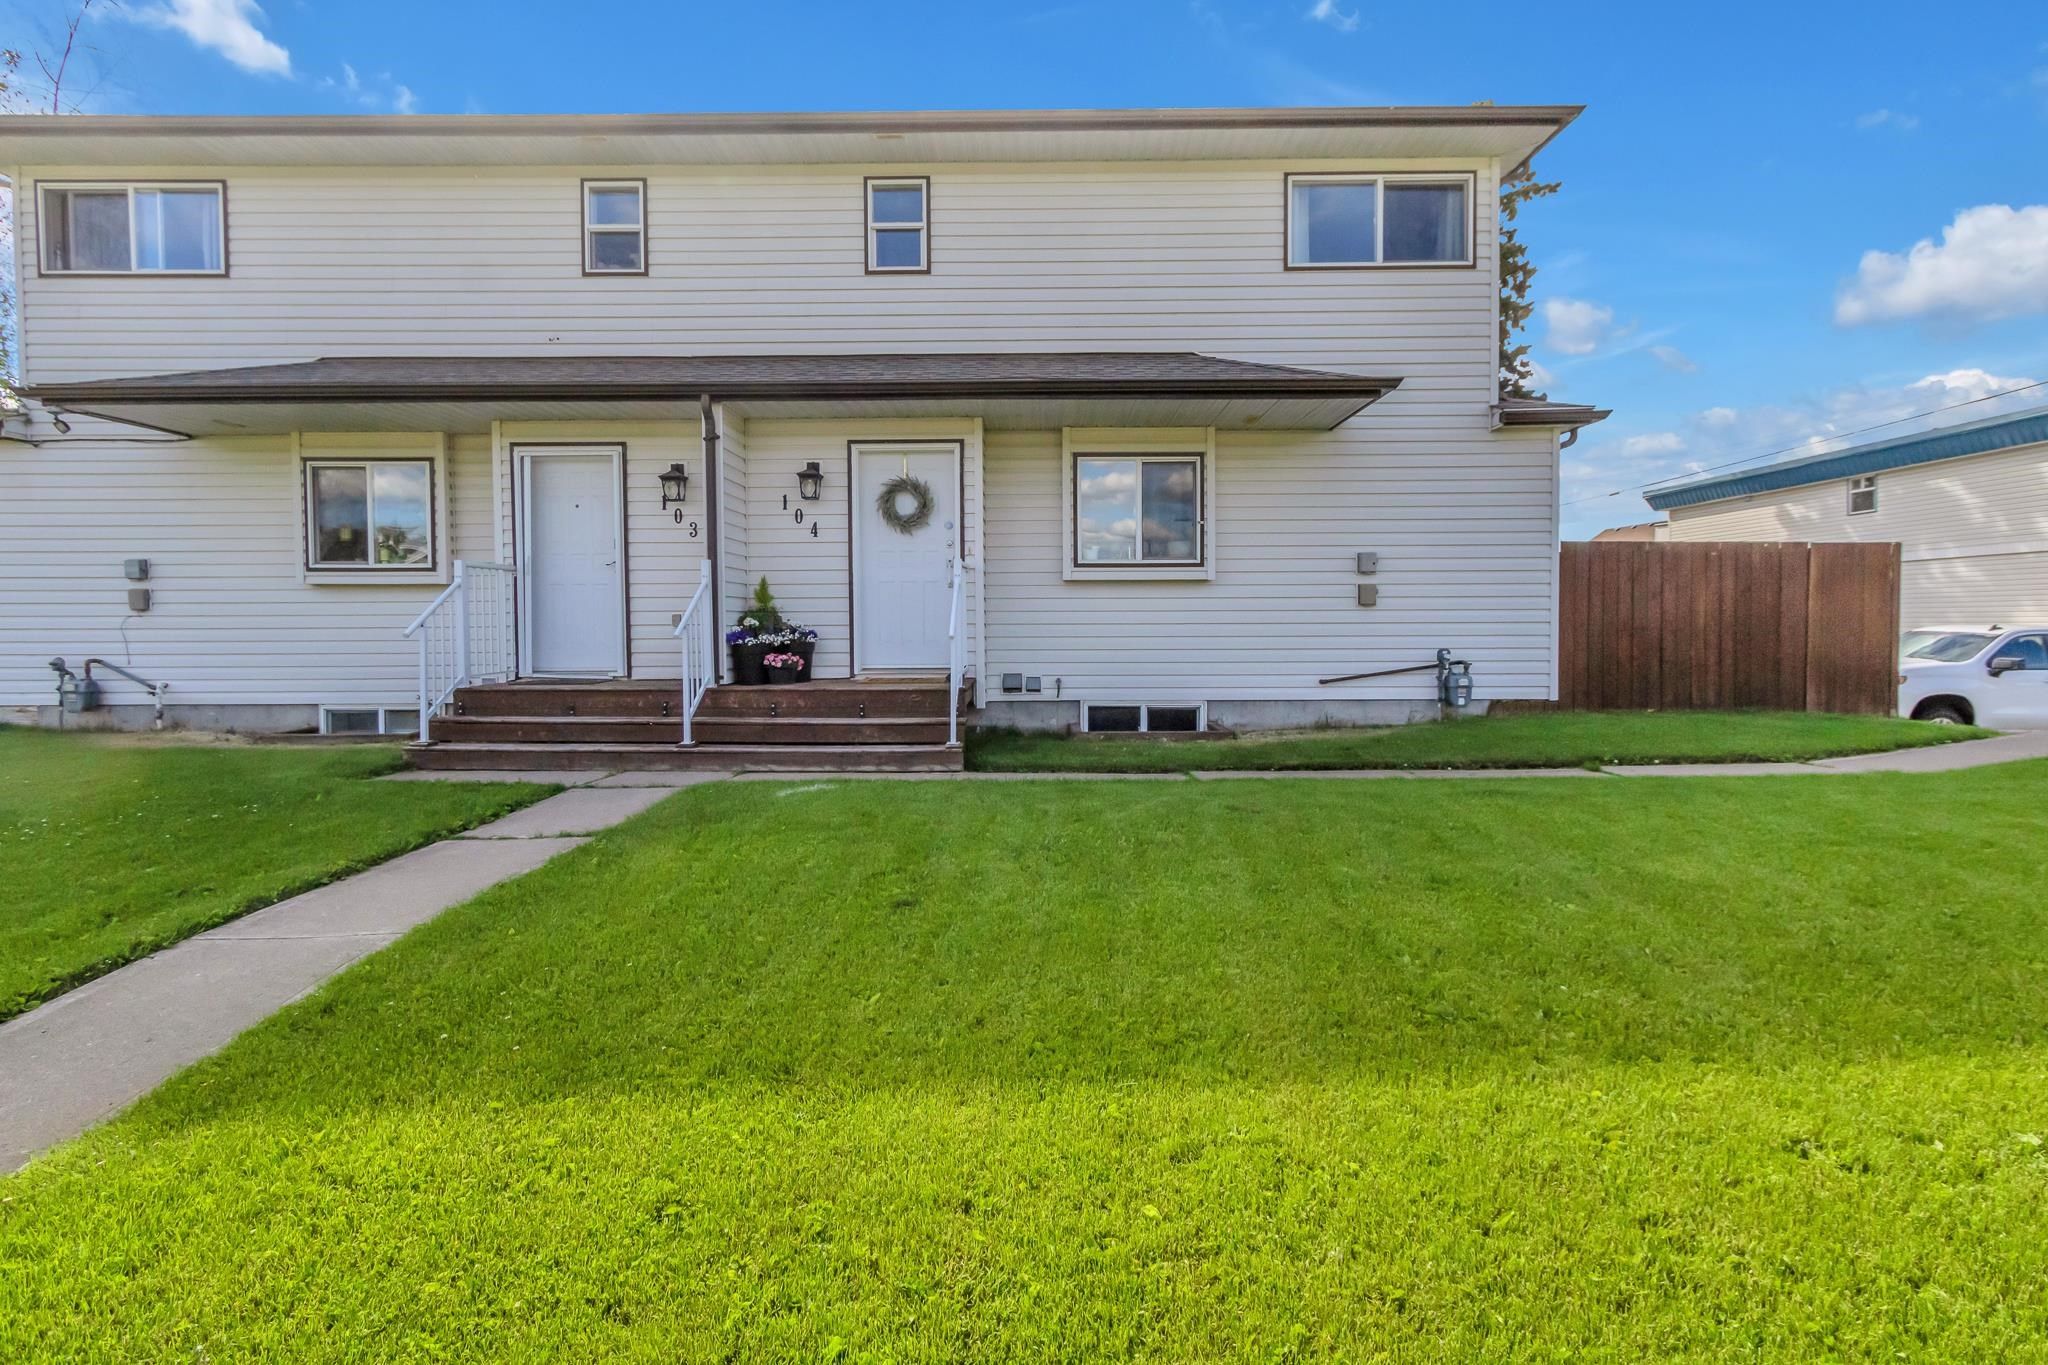 Open House. Open House on Sunday, July 31, 2022 12:00PM - 1:00PM
Check out this amazing home with Angeline Urysty! What a great location for anyone working downtown!